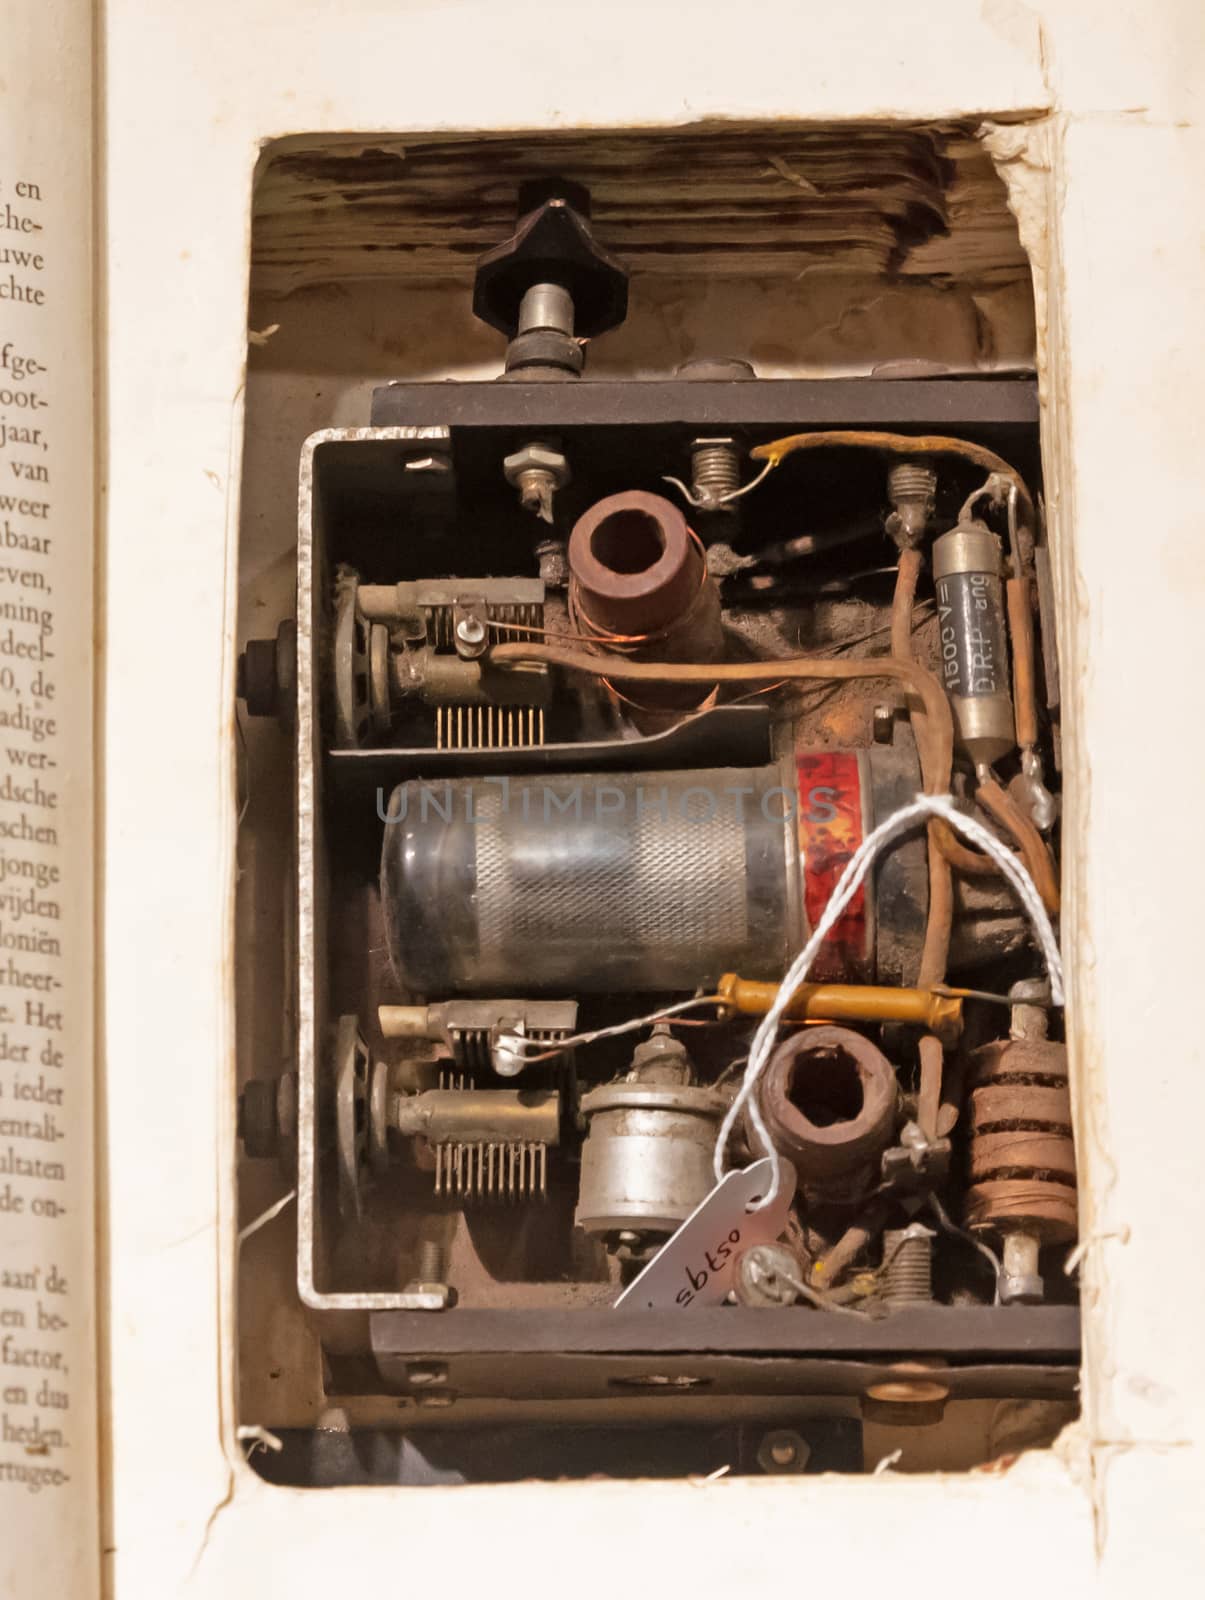 Overloon, the Netherlands on july 30, 2020: Old radio hidden in a book, WW2